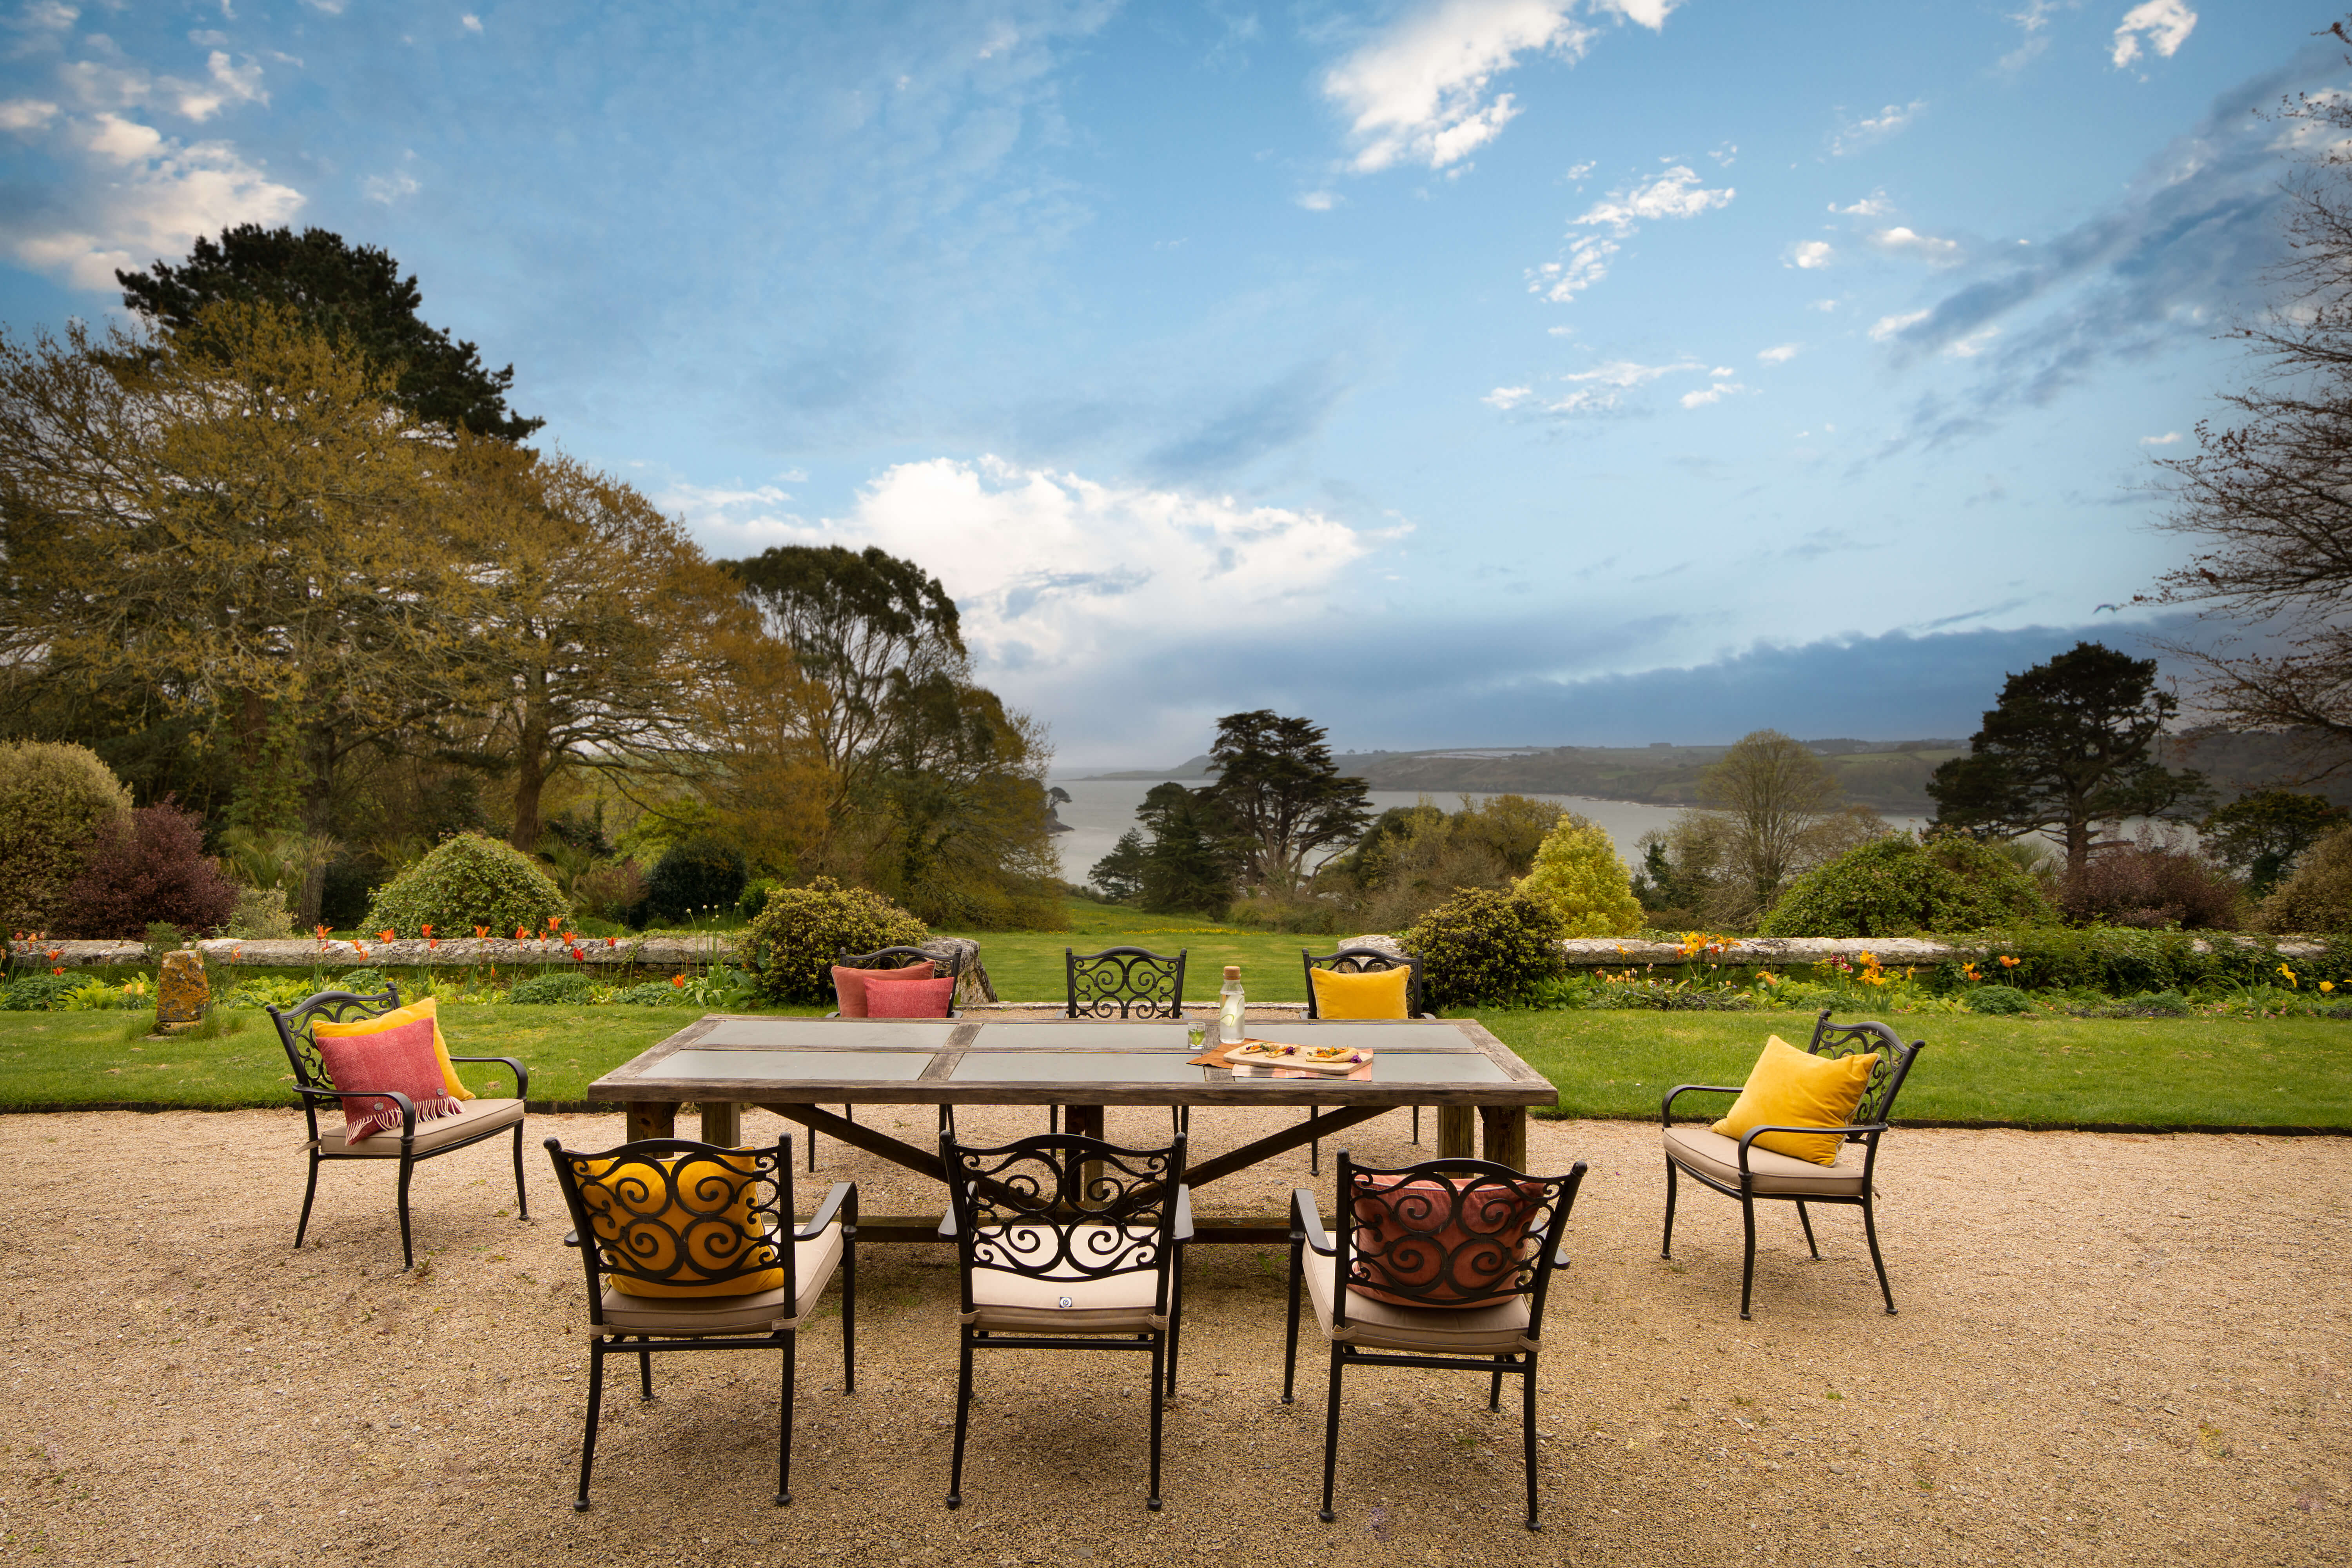 National Trust - Bosveal - outdoor seating for al fresco dining